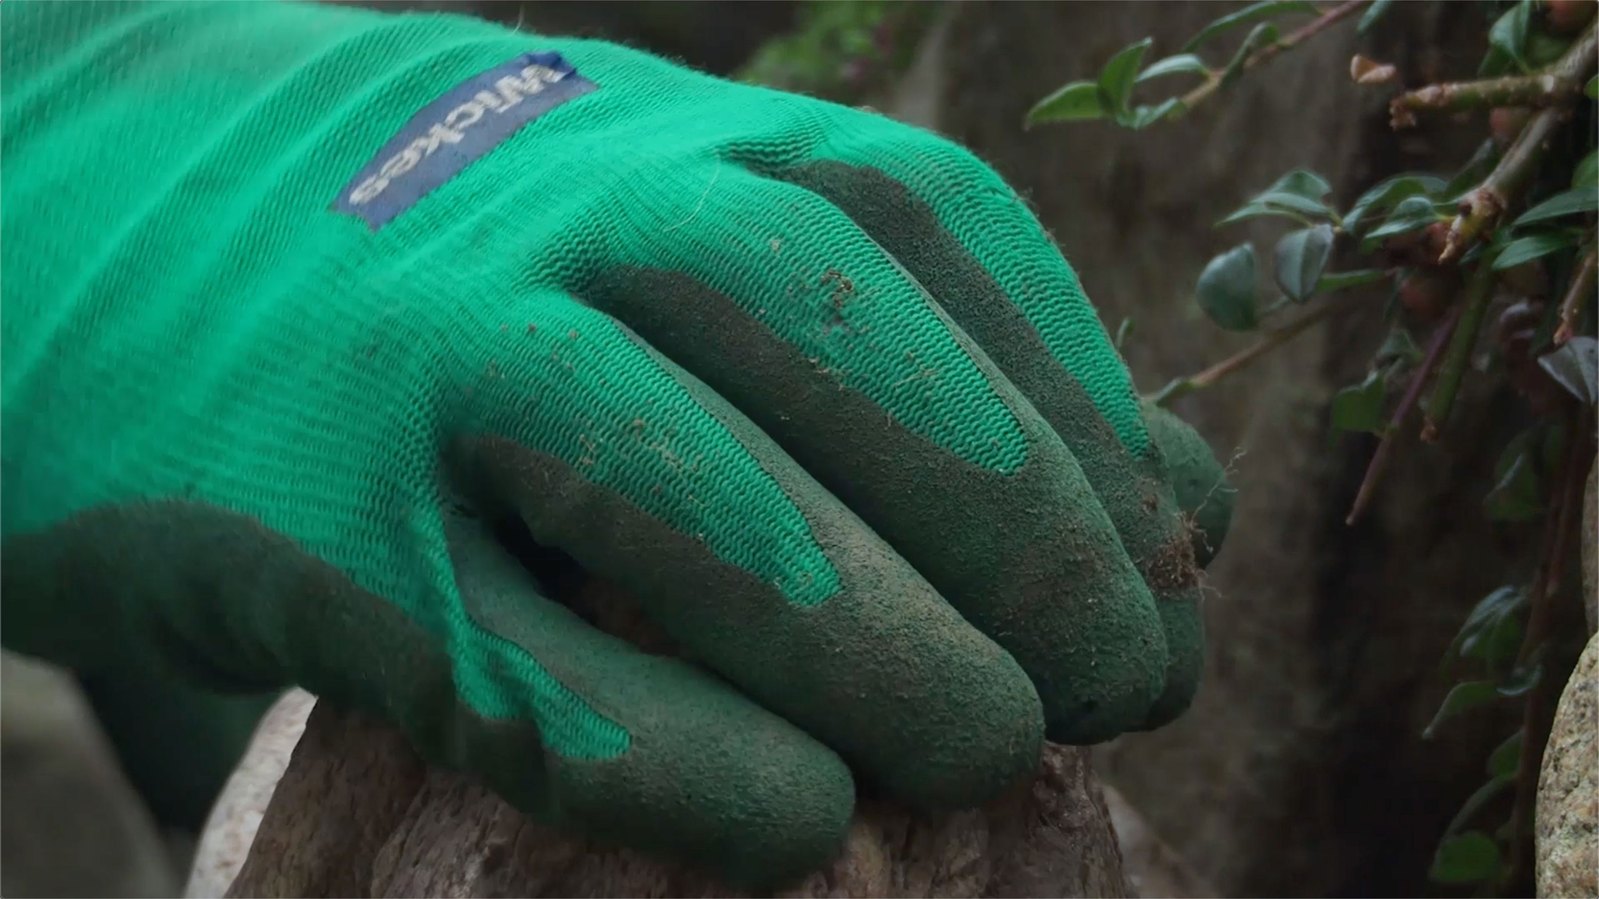 A hand seen close up wearing a green wickes glove with rubber fingers. Jamie Kane